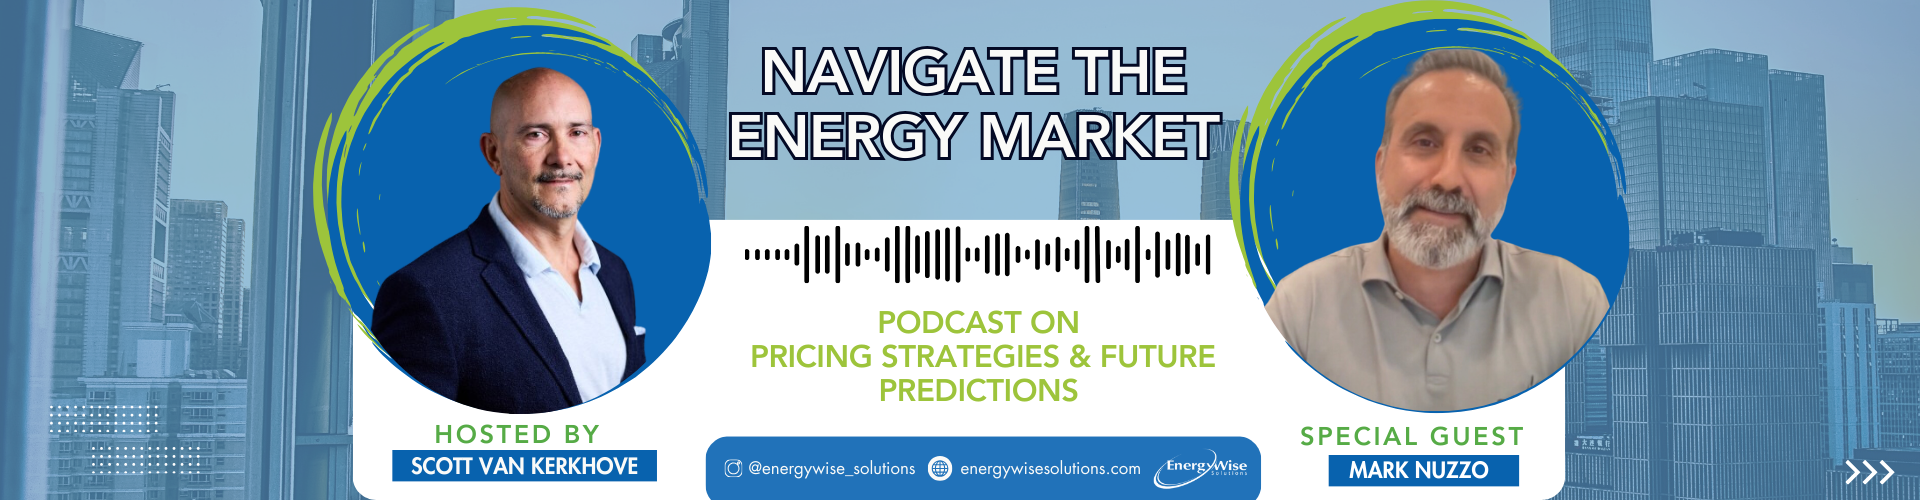 Navigate The Energy Market: Pricing Strategies & Predictions